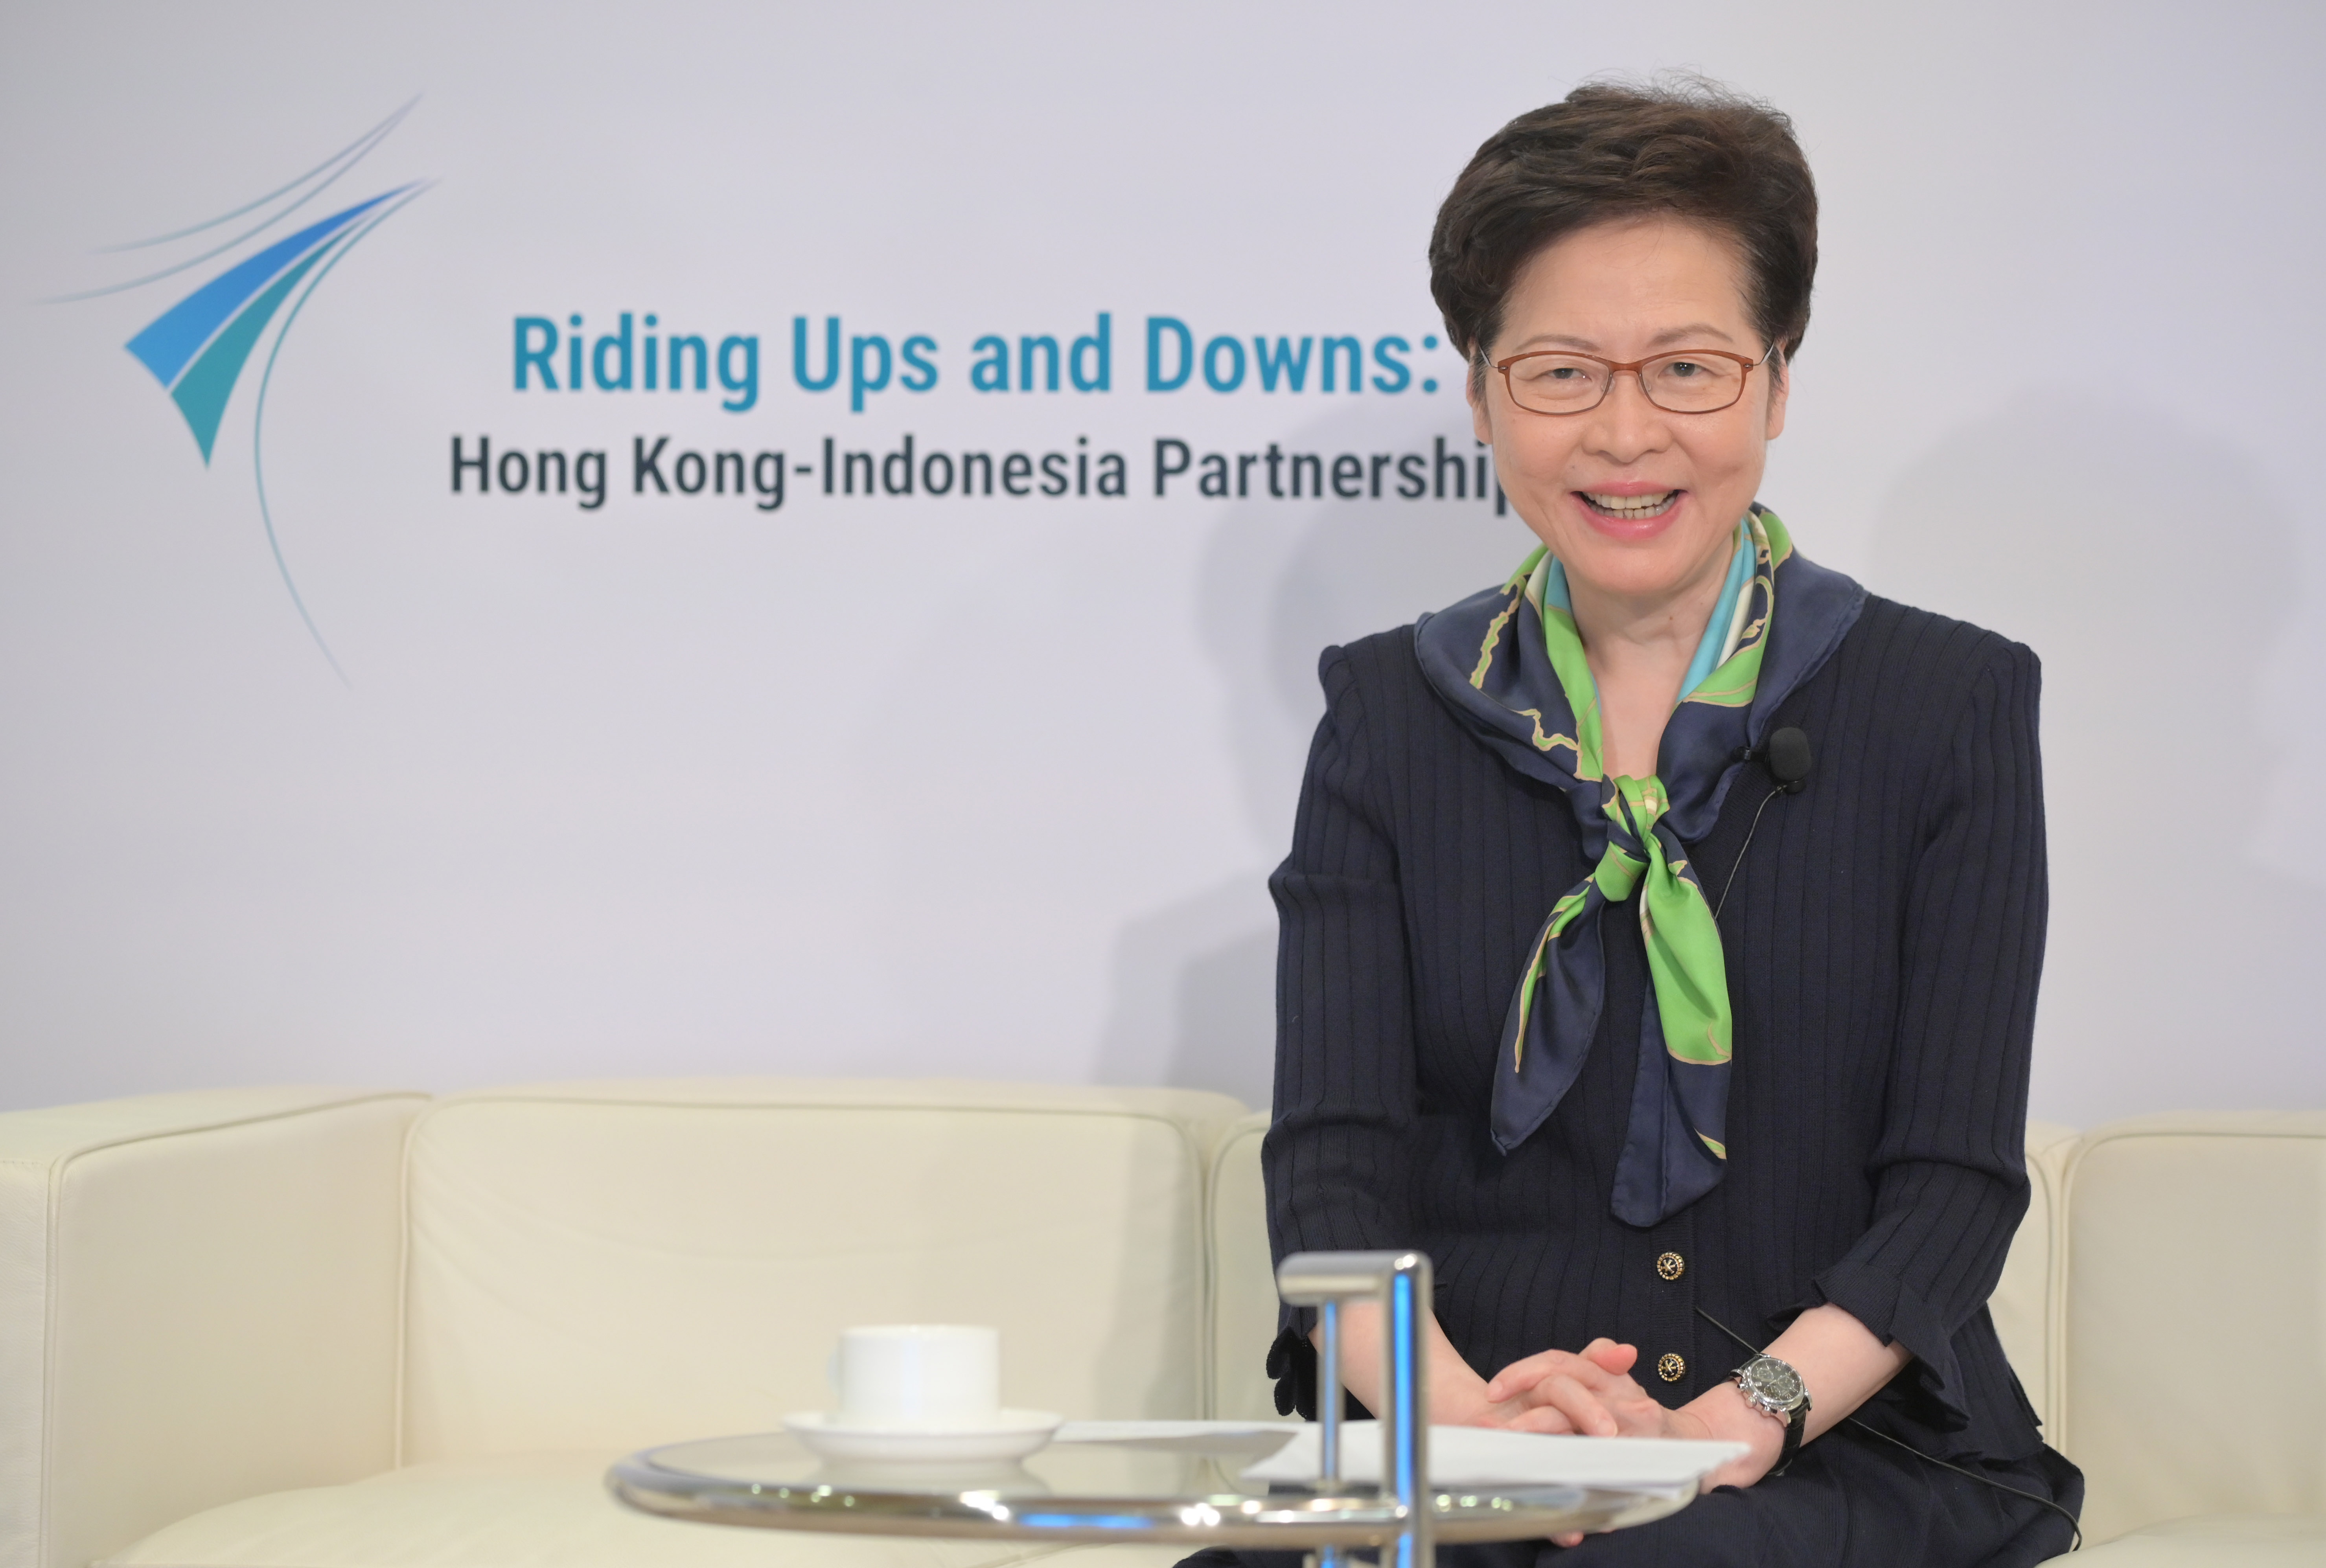 The Chief Executive, Mrs Carrie Lam, delivers a speech at Riding Ups and Downs: Hong Kong-Indonesia Partnership Webinar.